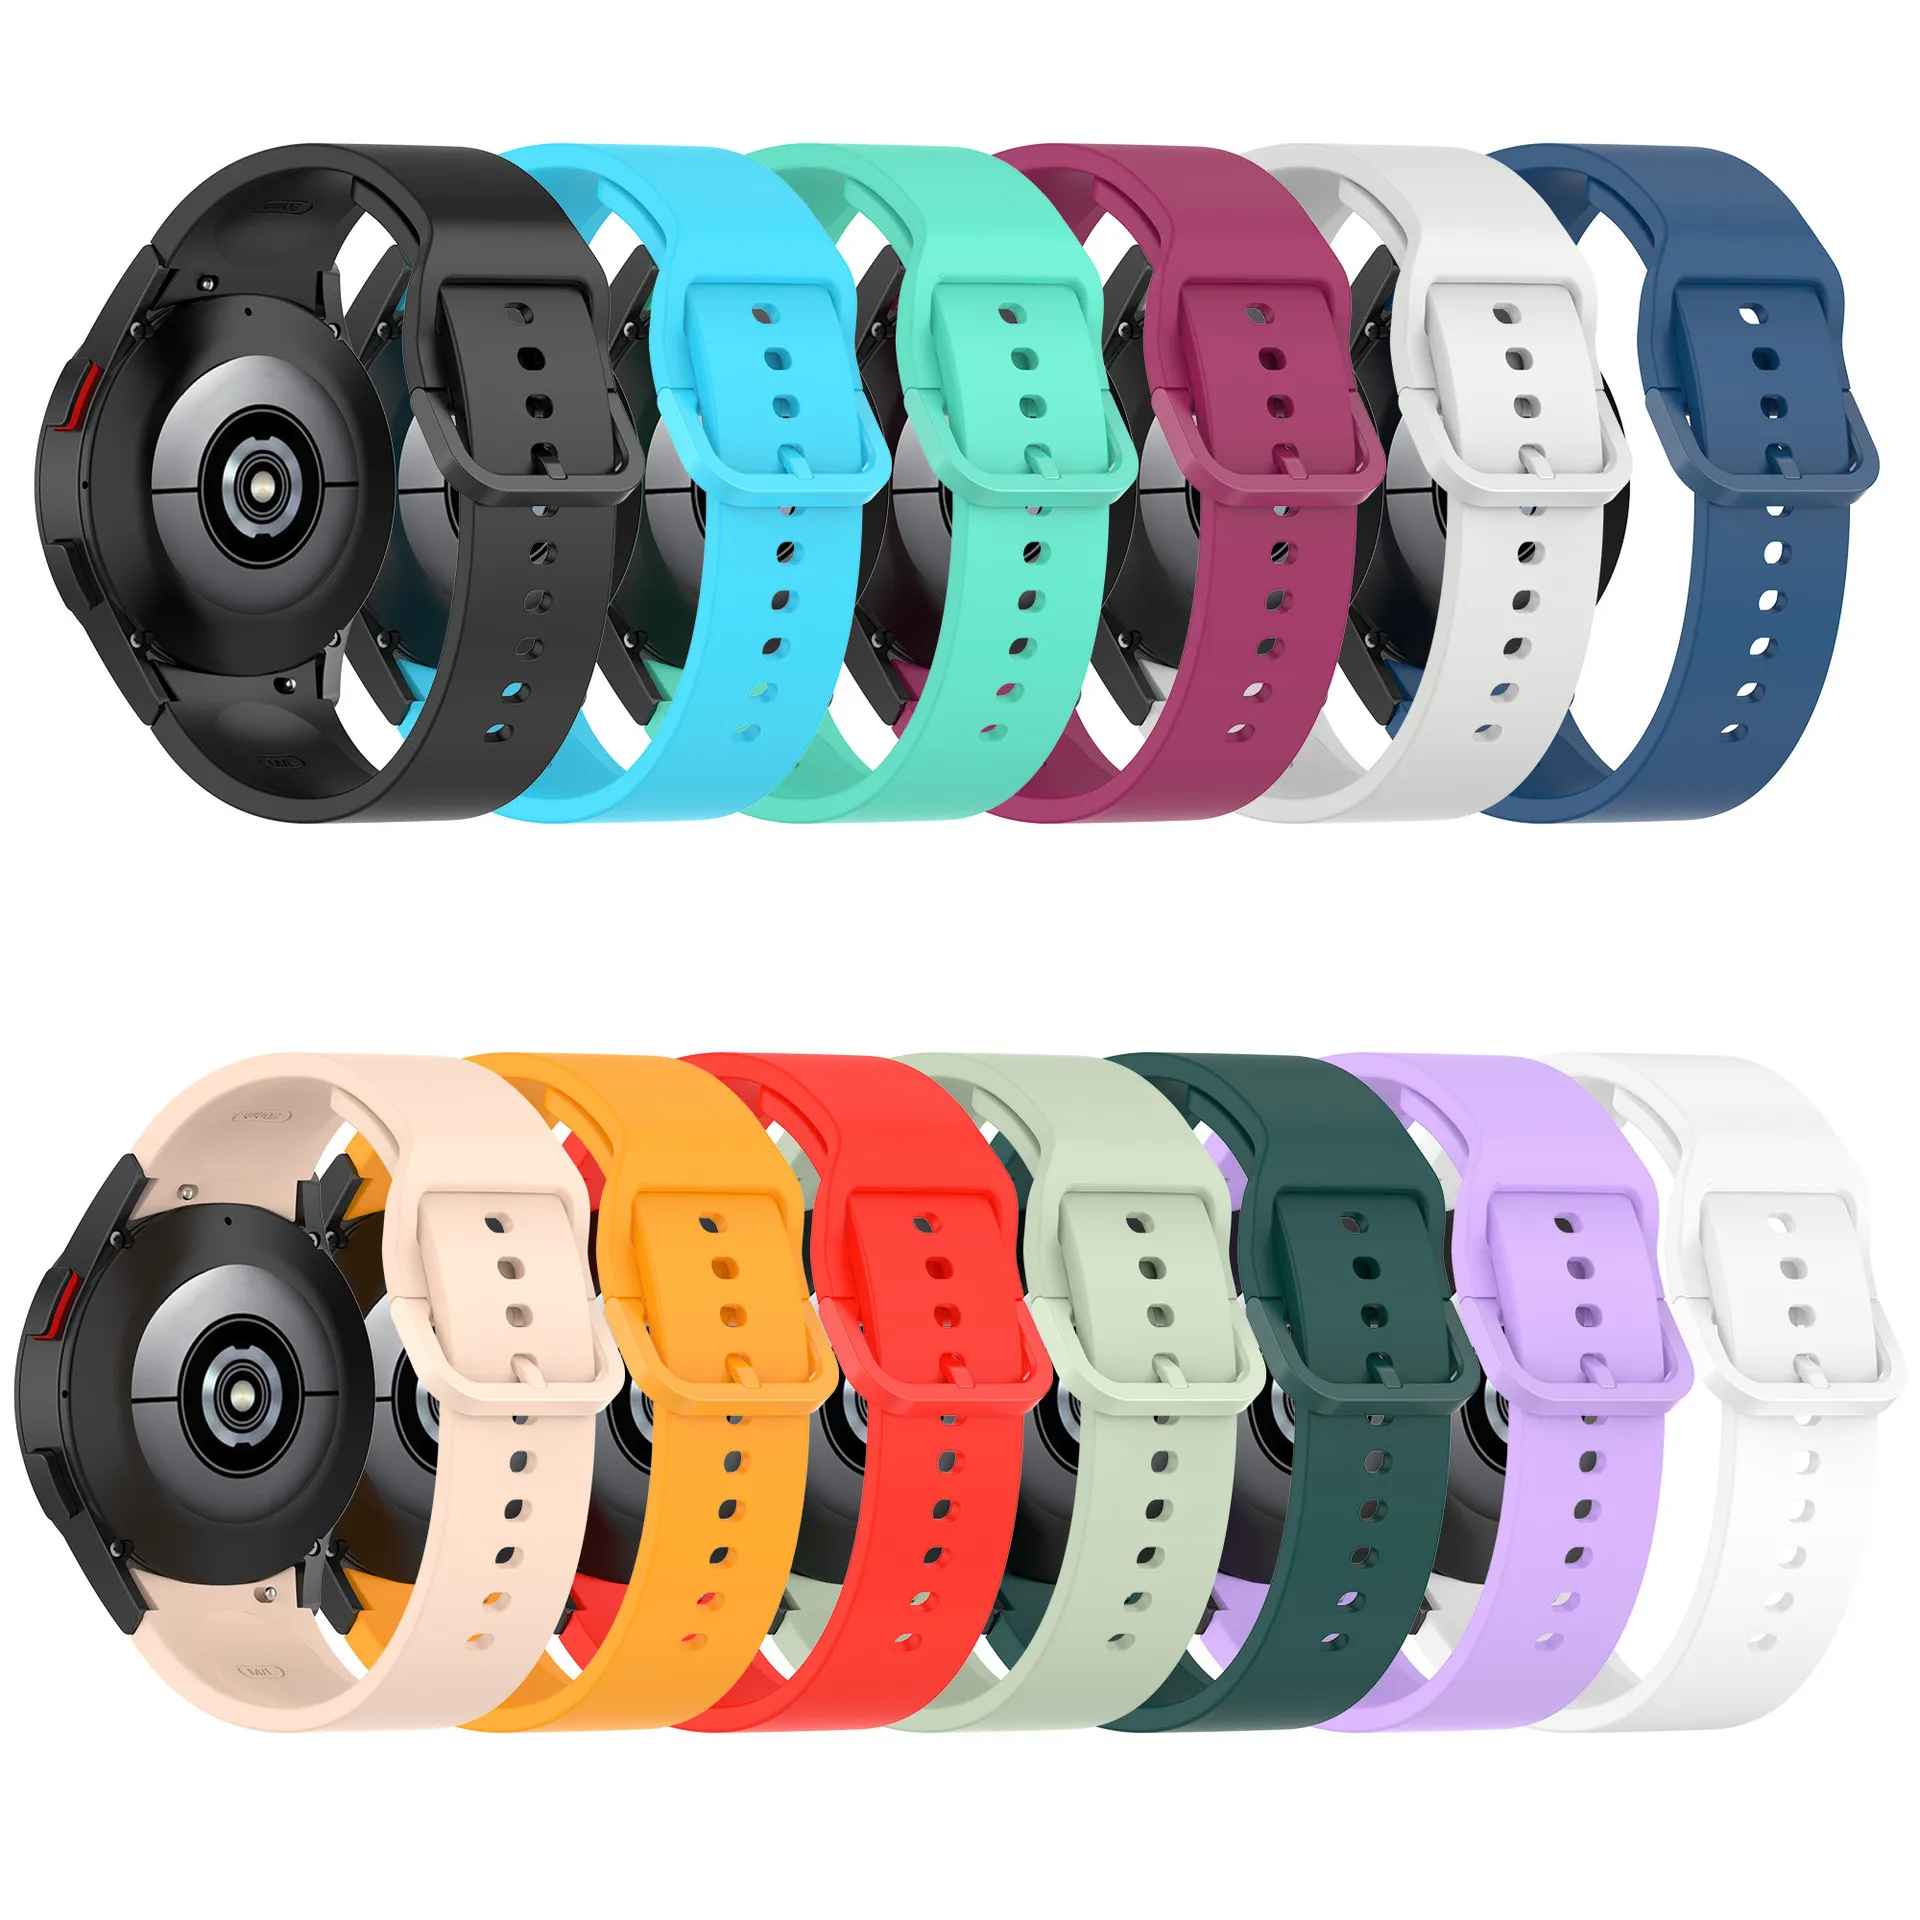 High quality Silicone Strap Sport Bracelet slap wrist band smart watch bands for samsung galaxy watch 4 band